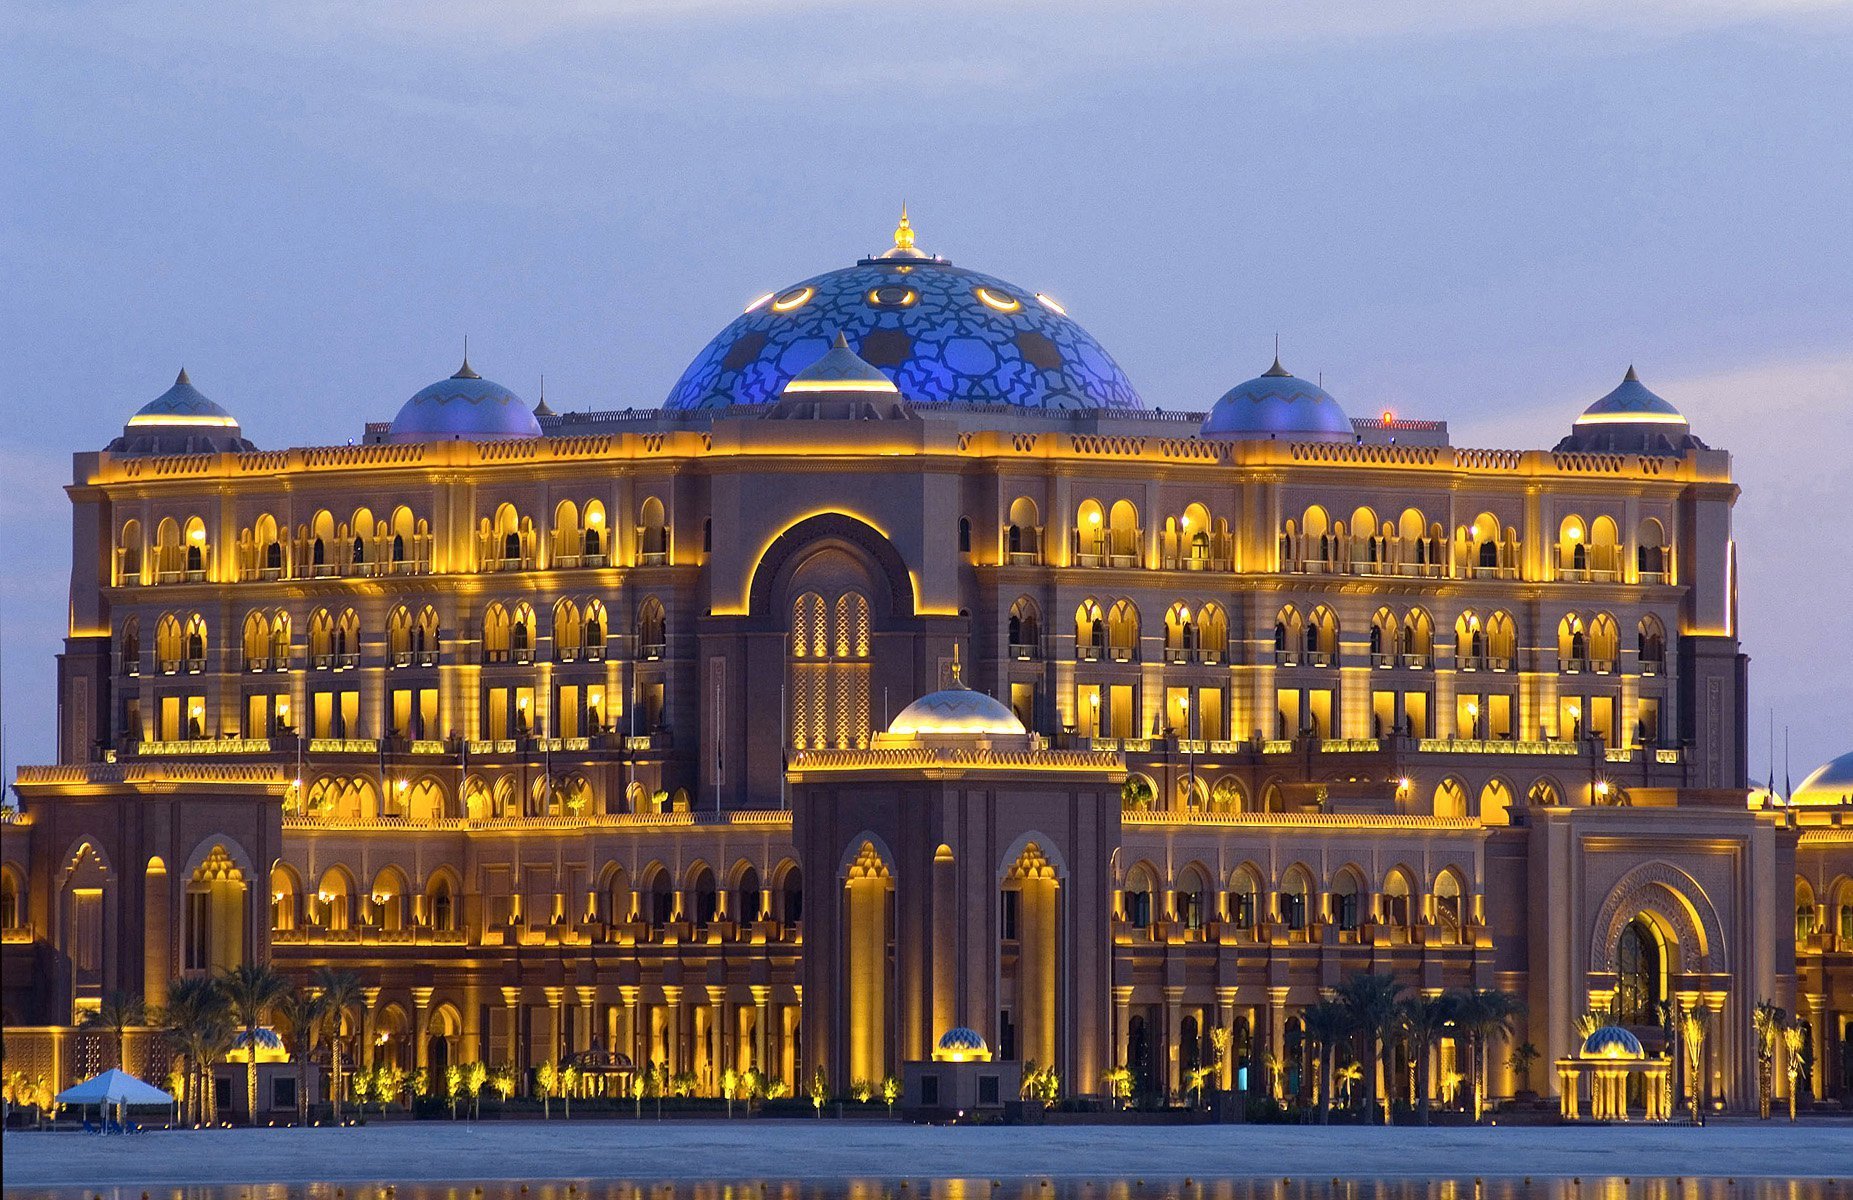 40 Amazing Shots Of Hotels From Around The World That Give ‘Luxury’ A